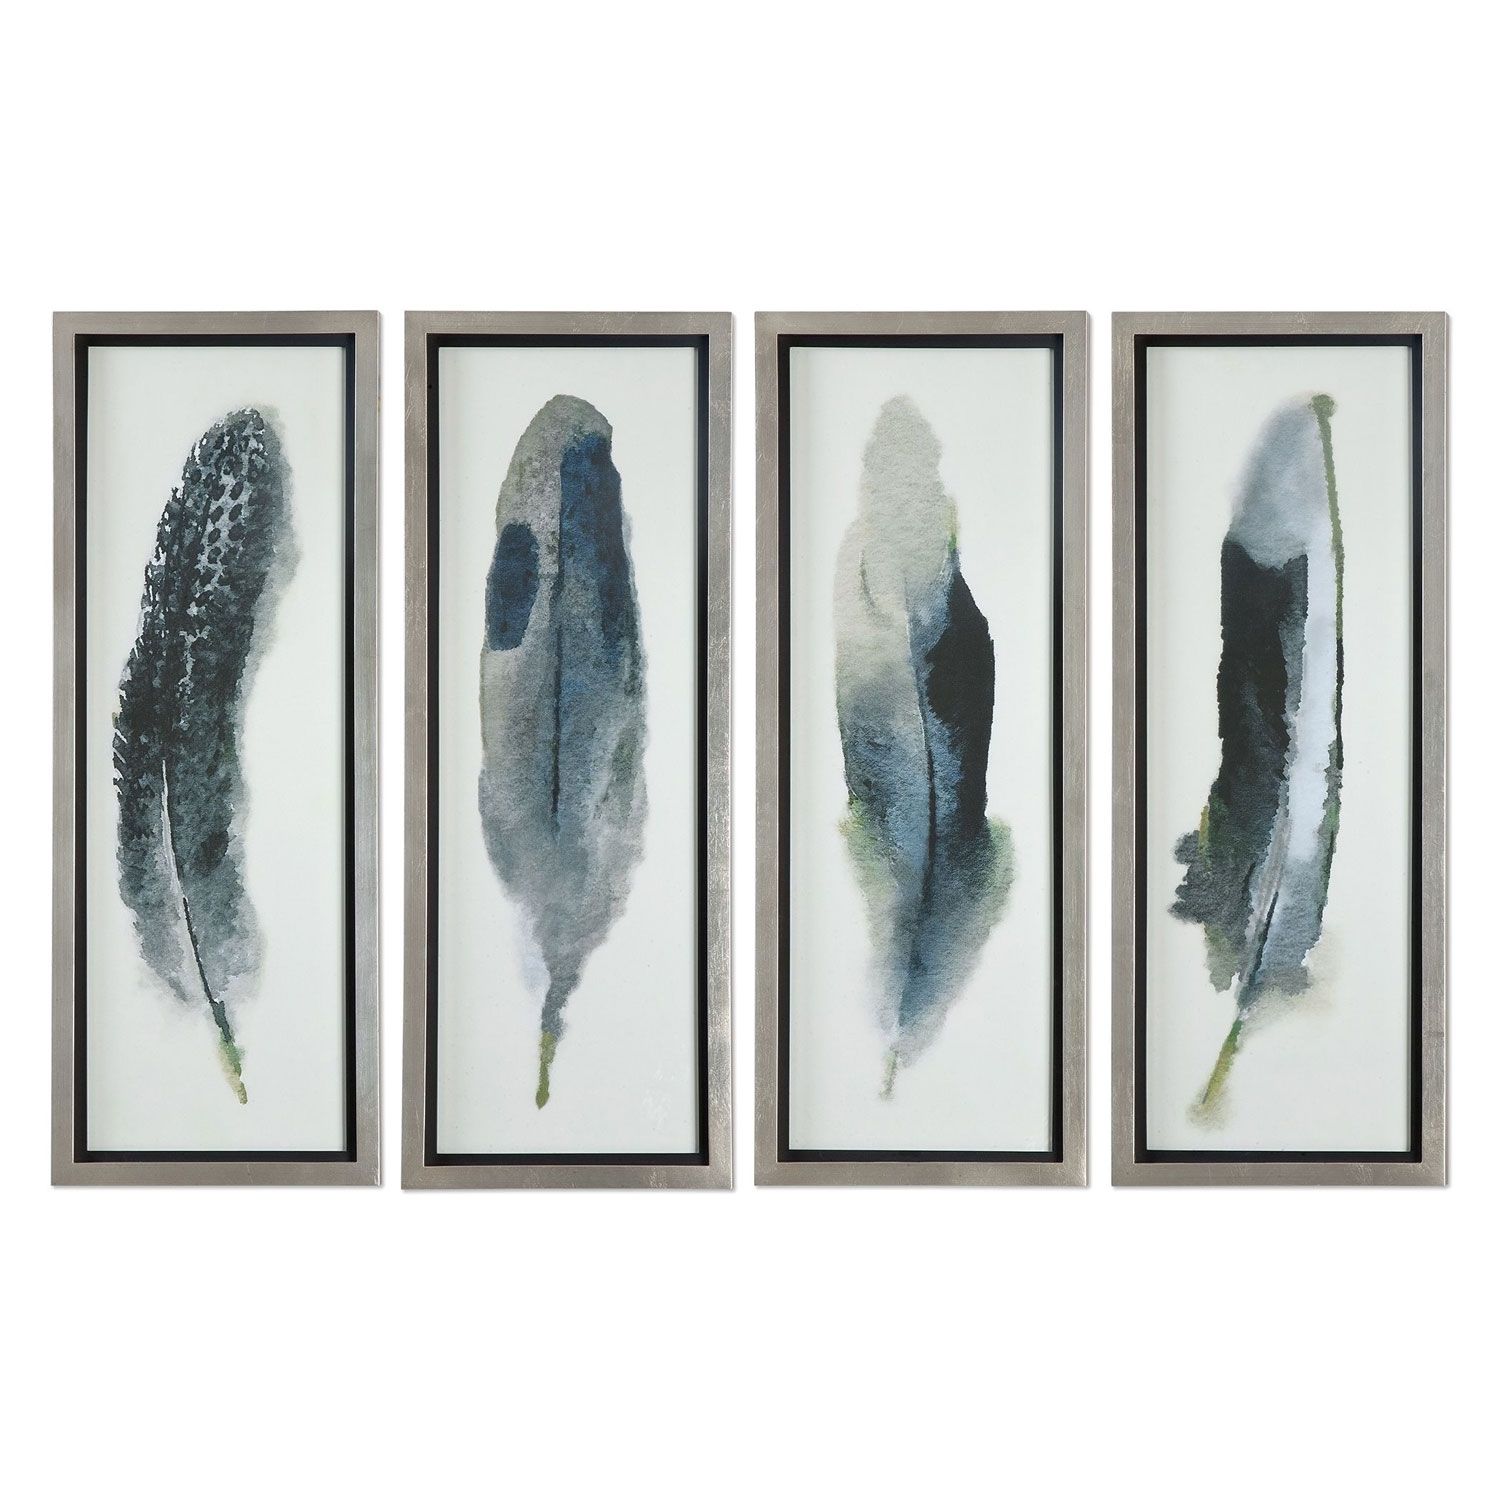 Uttermost Feathered Beautygrace Feyock: 14 X 38 Inch Wall Art With Regard To Most Recent Feather Wall Art (View 13 of 20)